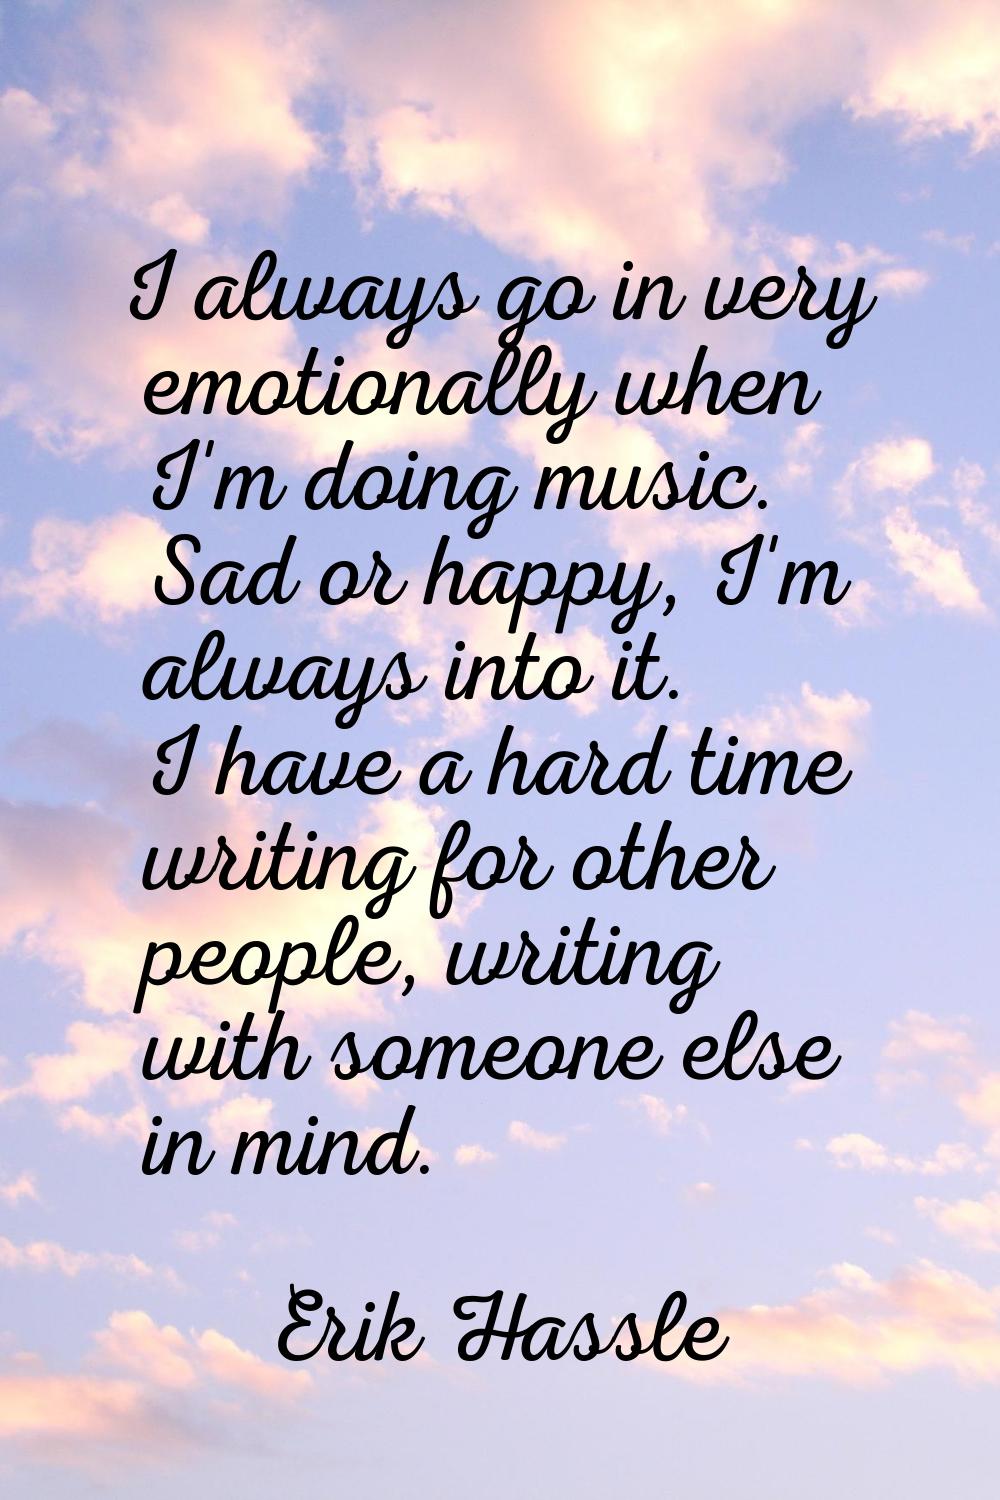 I always go in very emotionally when I'm doing music. Sad or happy, I'm always into it. I have a ha